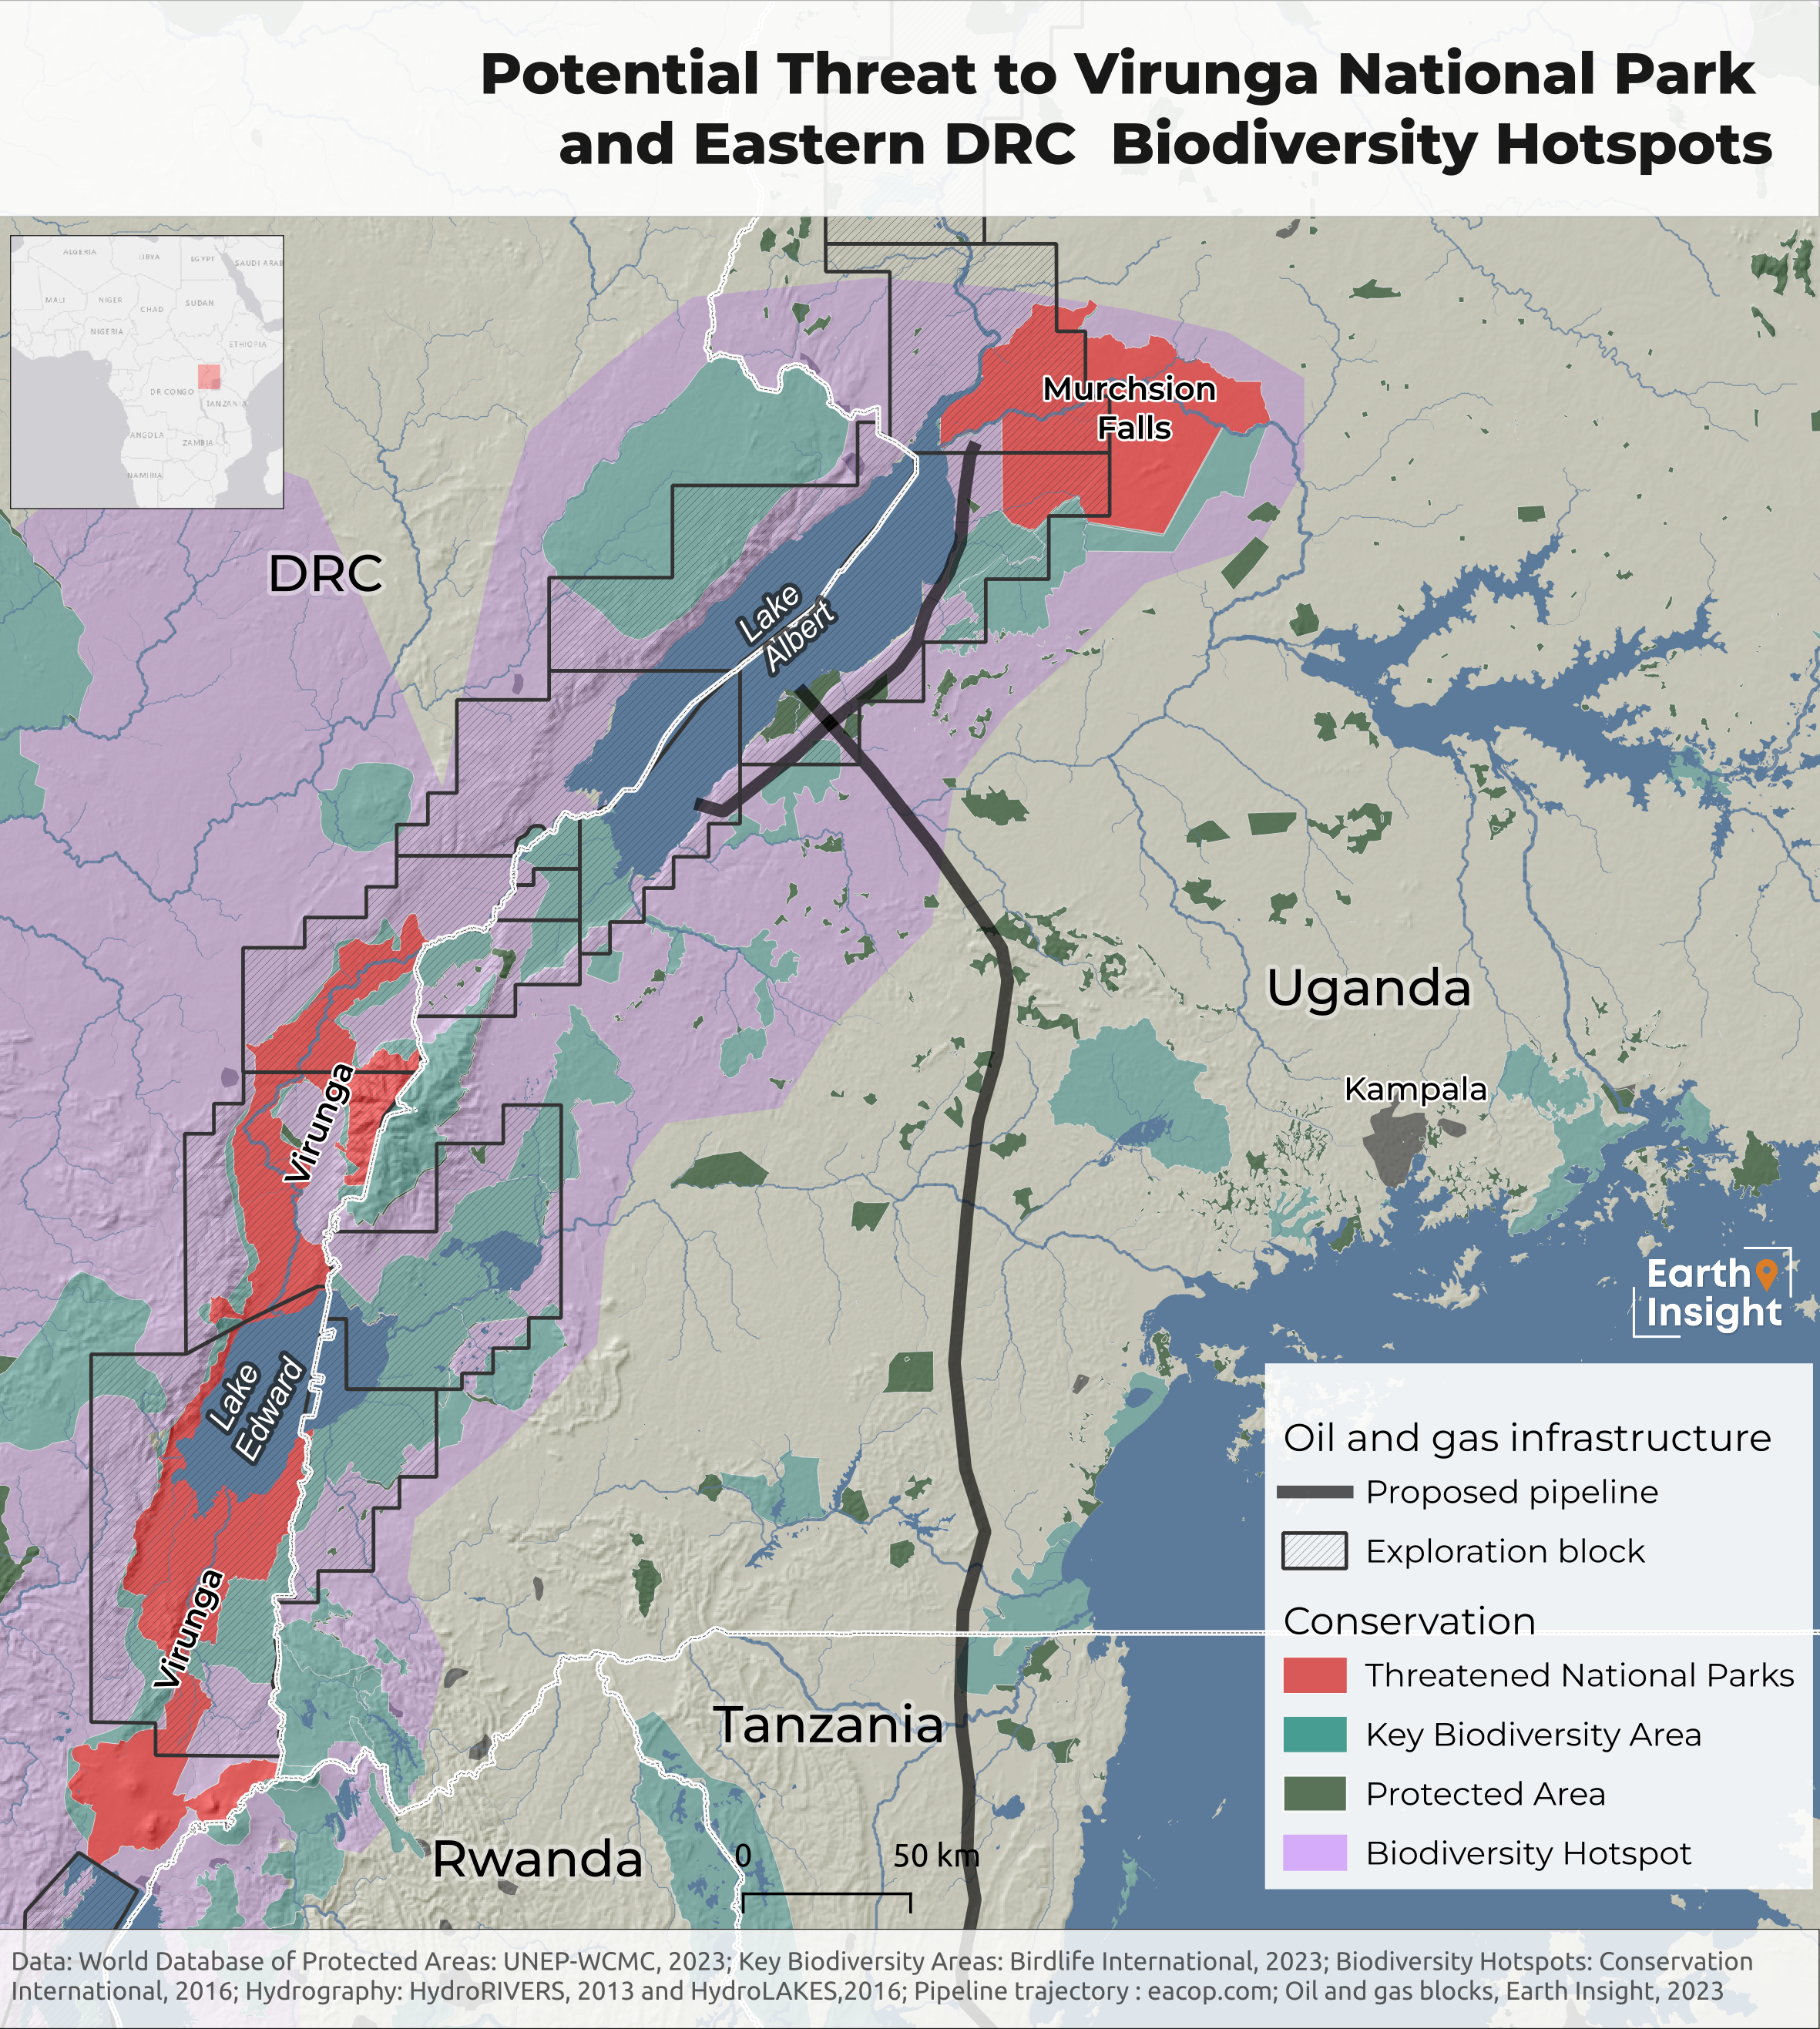 A map shows potential threats to the Virunga National Park and Eastern DRC.